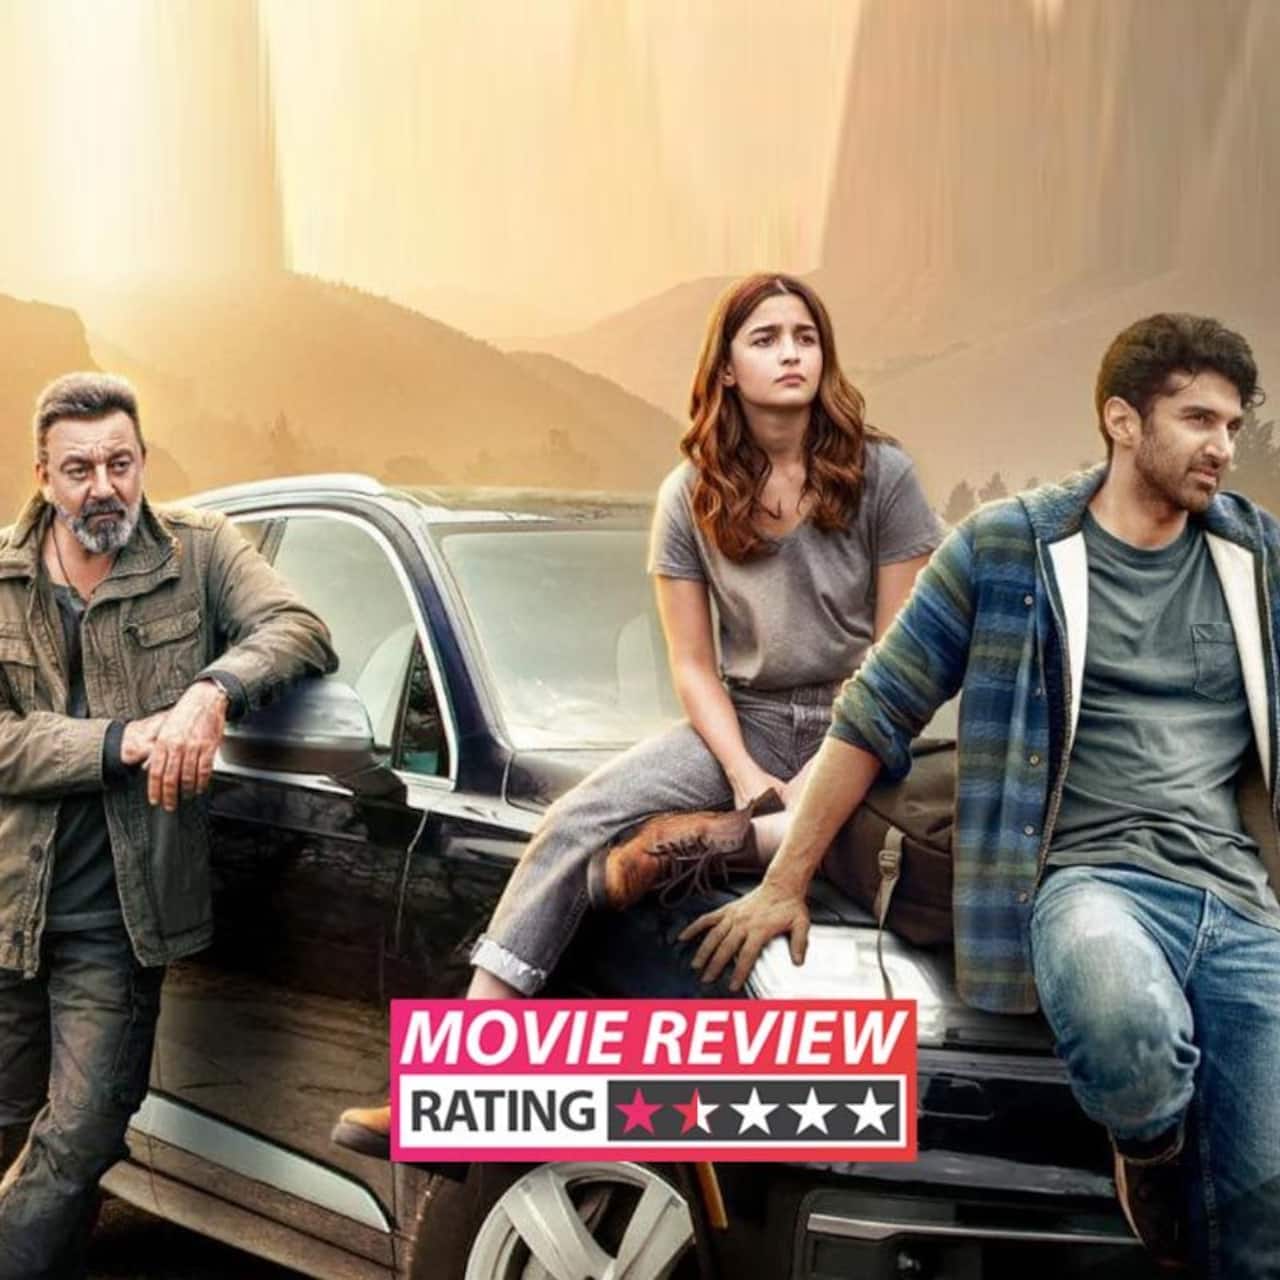 Sadak 2 movie review: Sanjay Dutt and Jisshu Sengupta are the only bright spots in this snoozefest of a film